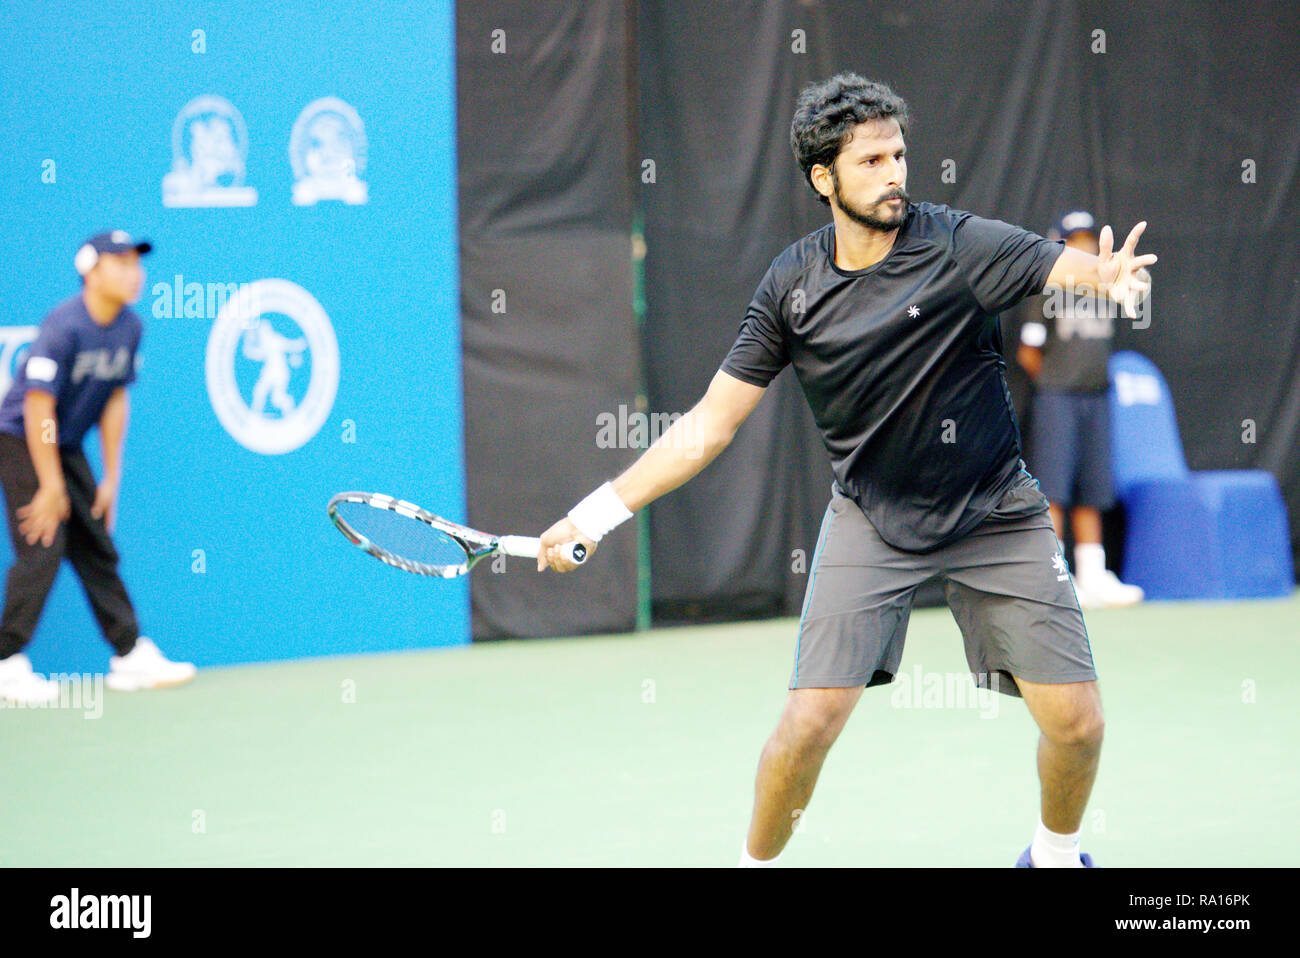 Pune, India. 29th December 2018. Saketh Myneni of India in action in the first round of qualifying singles competition at Tata Open Maharashtra ATP Tennis tournament in Pune, India. Credit: Karunesh Johri/Alamy Live News Stock Photo